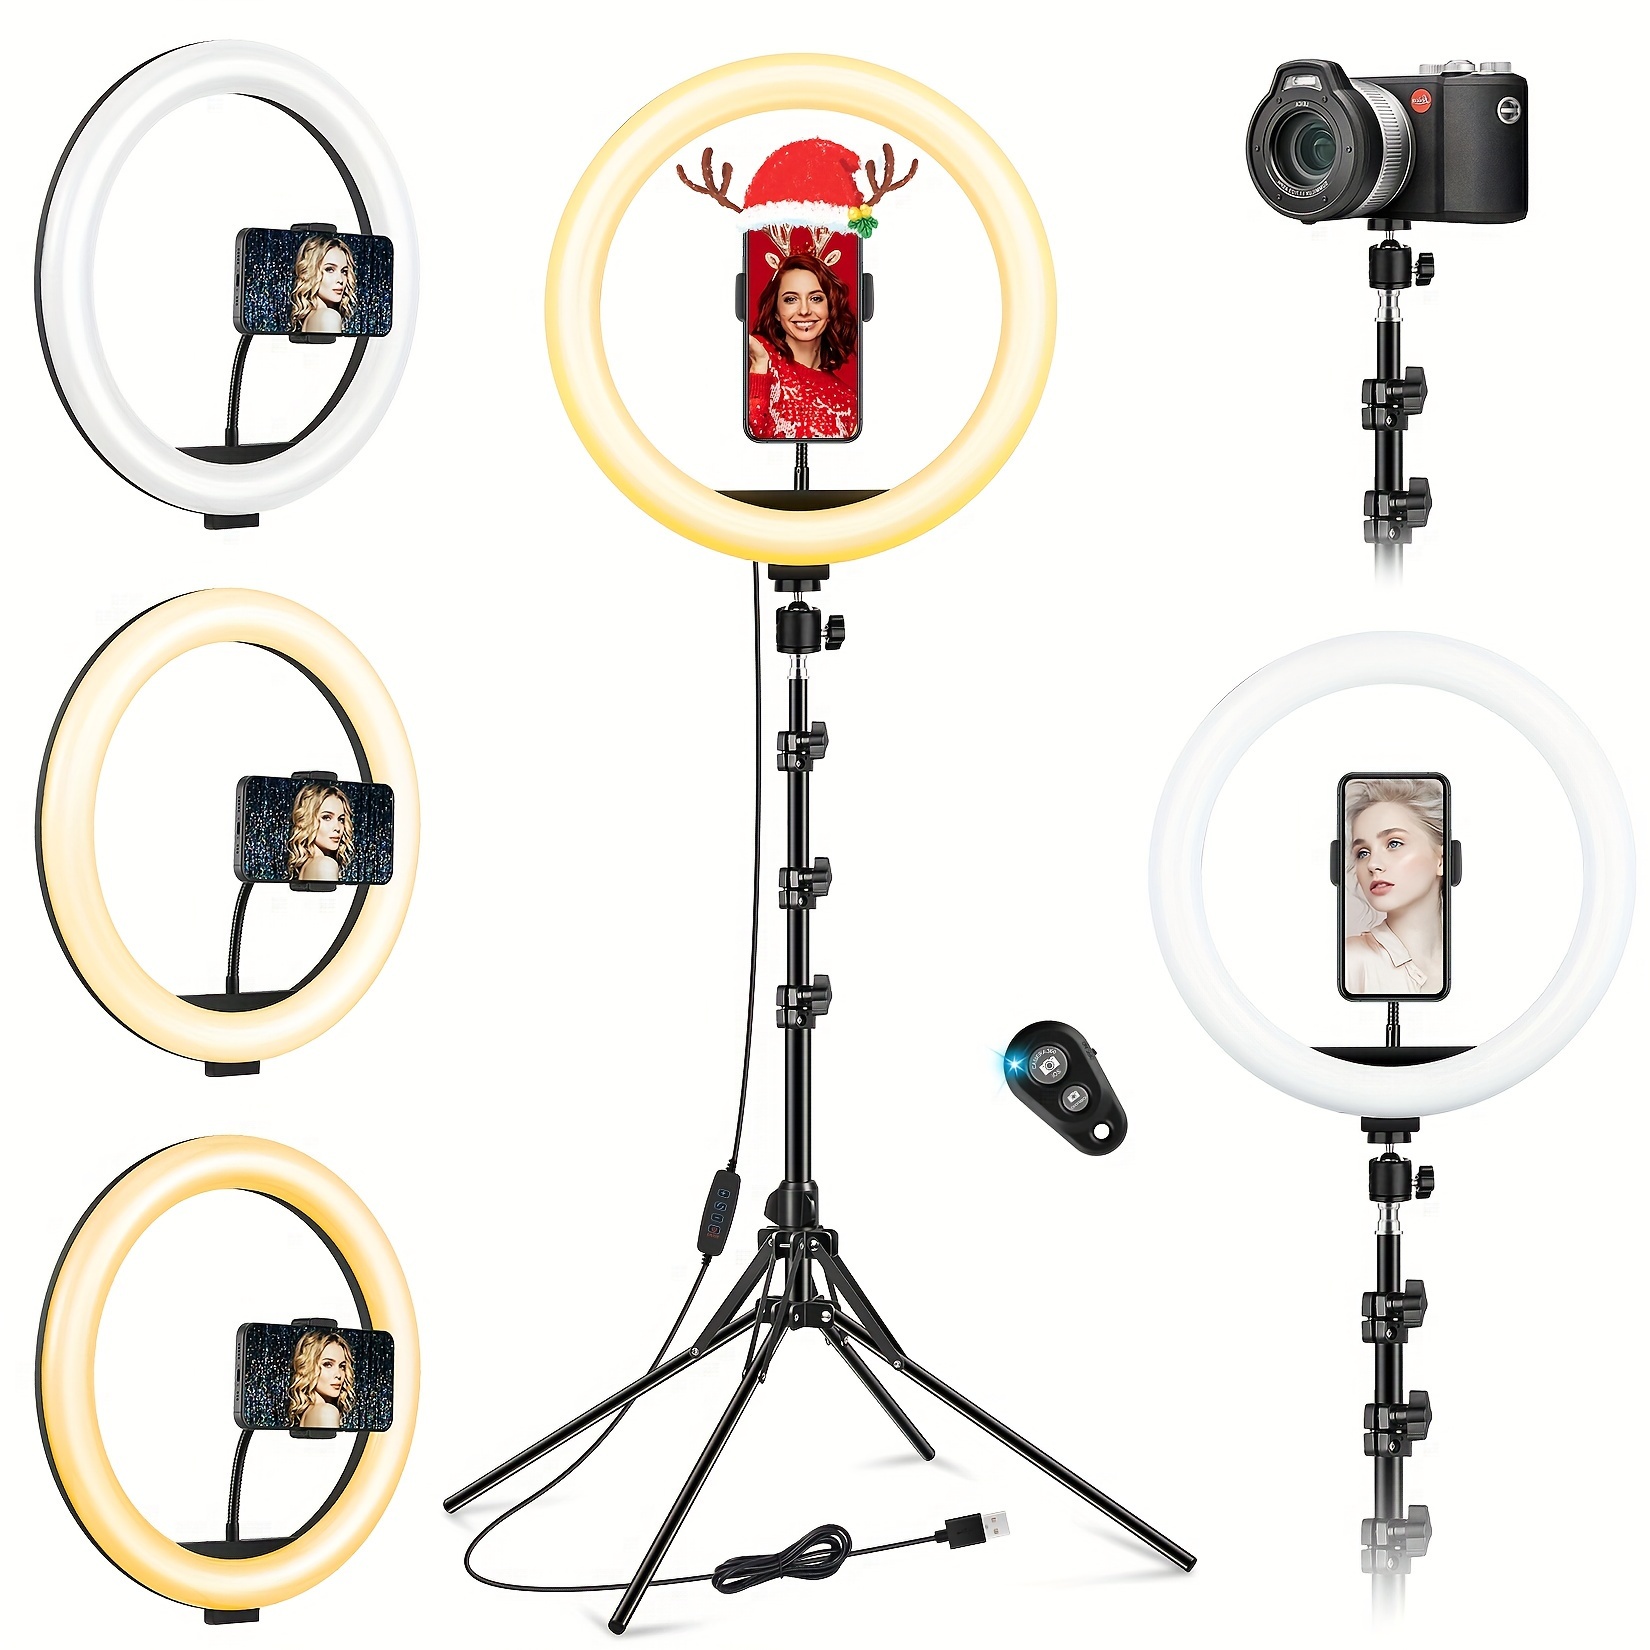 

13 Inch Ring Light With Floor Stand (ringlight Kit Totally 70.6" Tall), Led Circle Light With Phone Holder, For Photo Selfie, Video Recording, Zoom Meeting